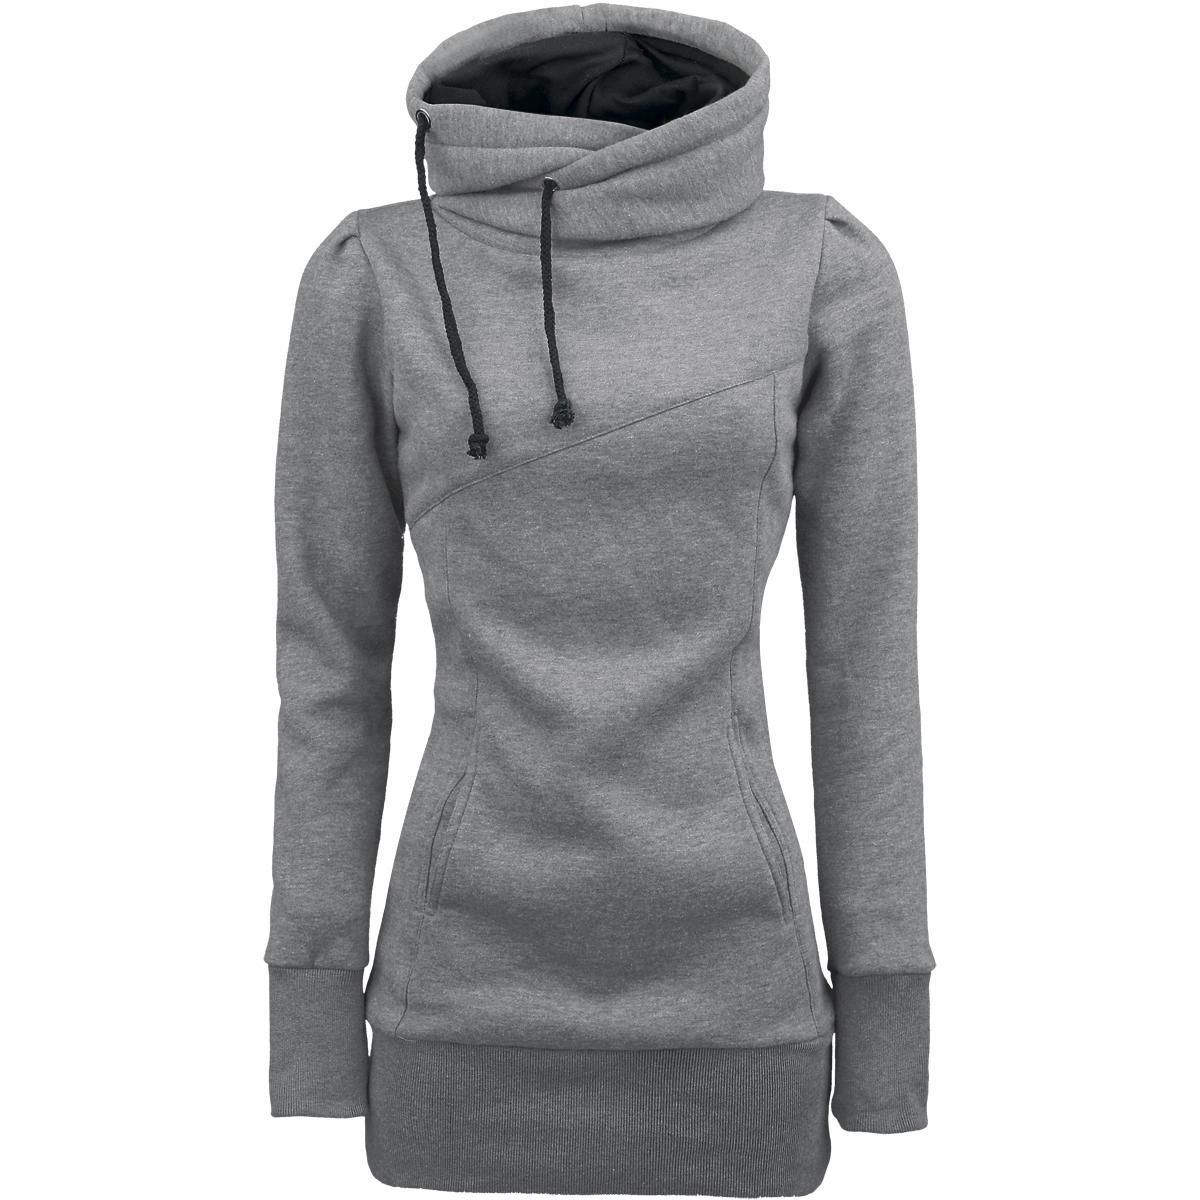 The ultimate hoodie:long length, long sleeves, and covers the neck! So cute :)